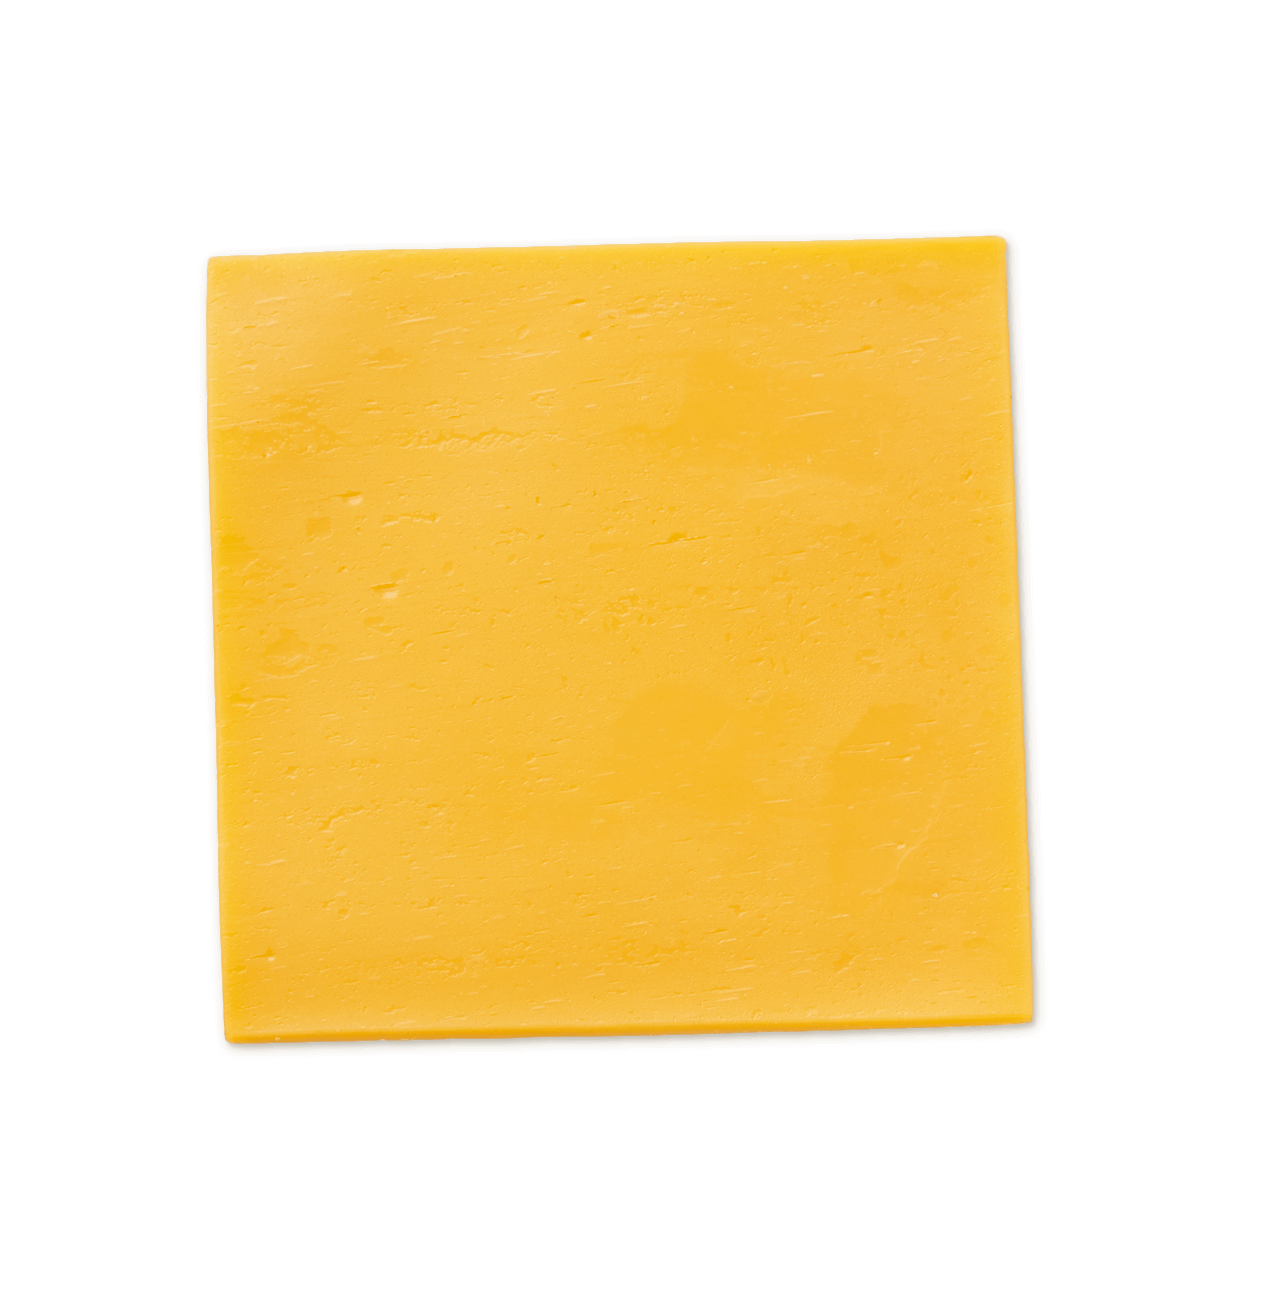 Download PNG image - Cheese PNG Image Free Download 